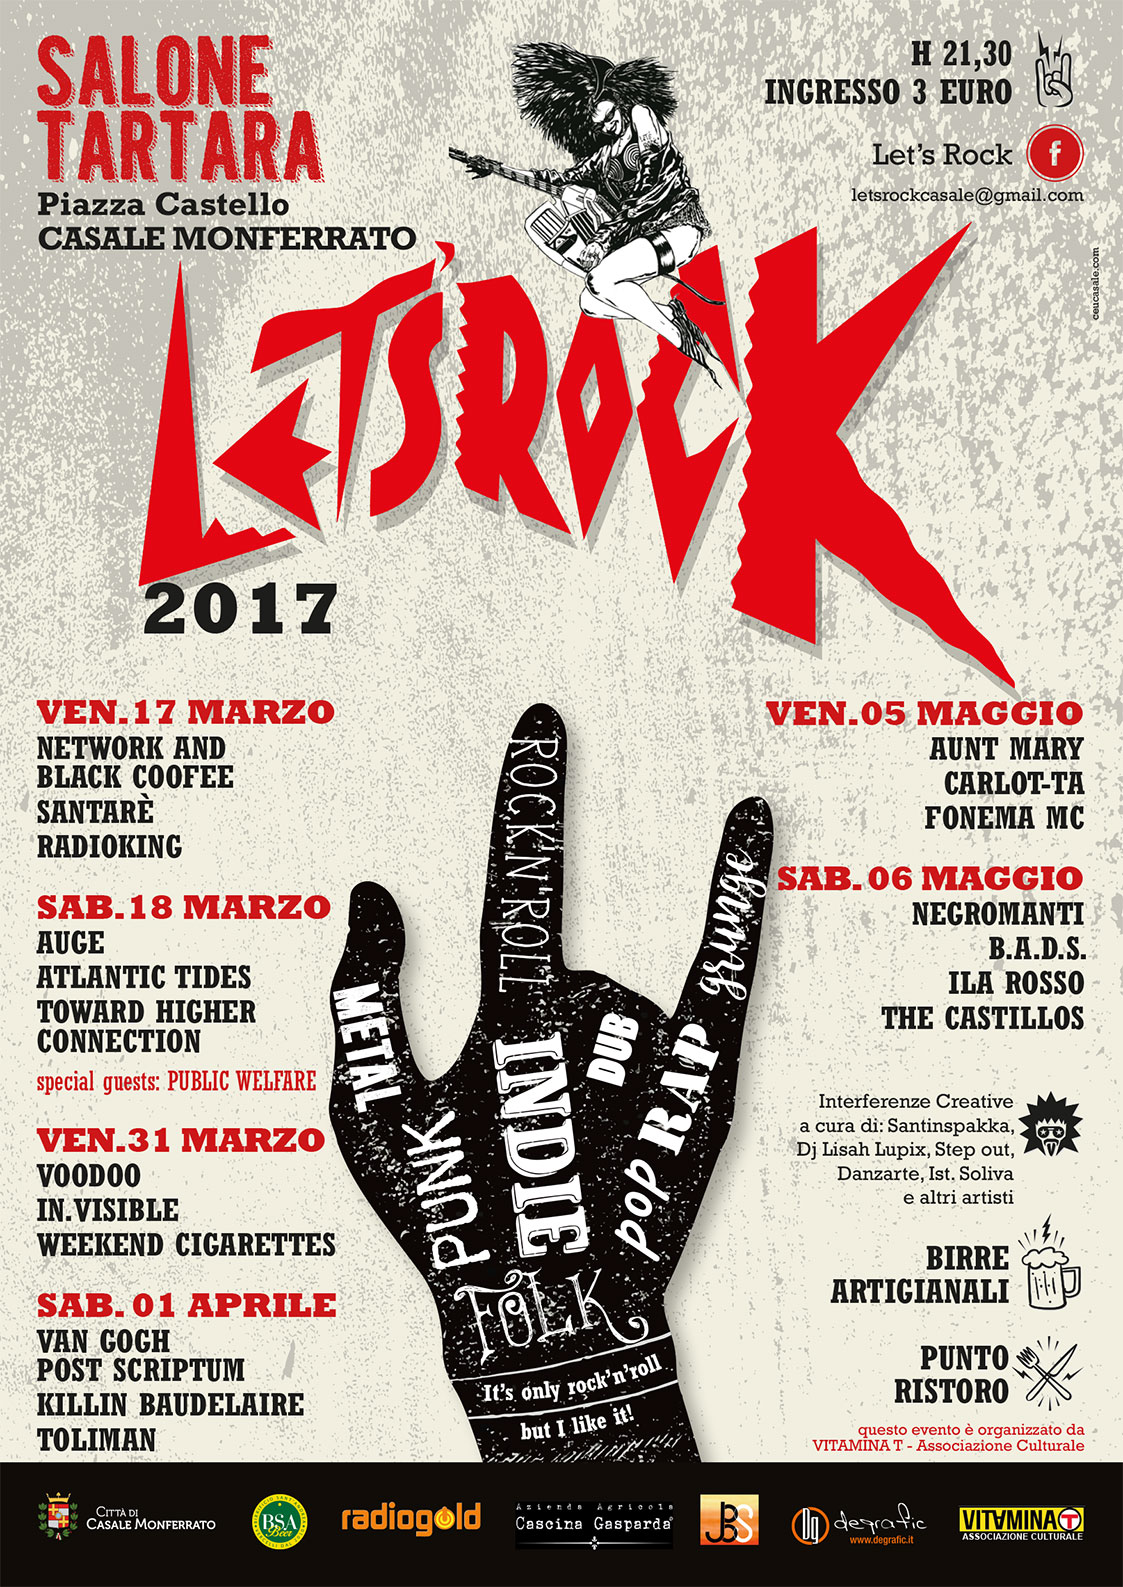 Il primo weekend di Let’s Rock